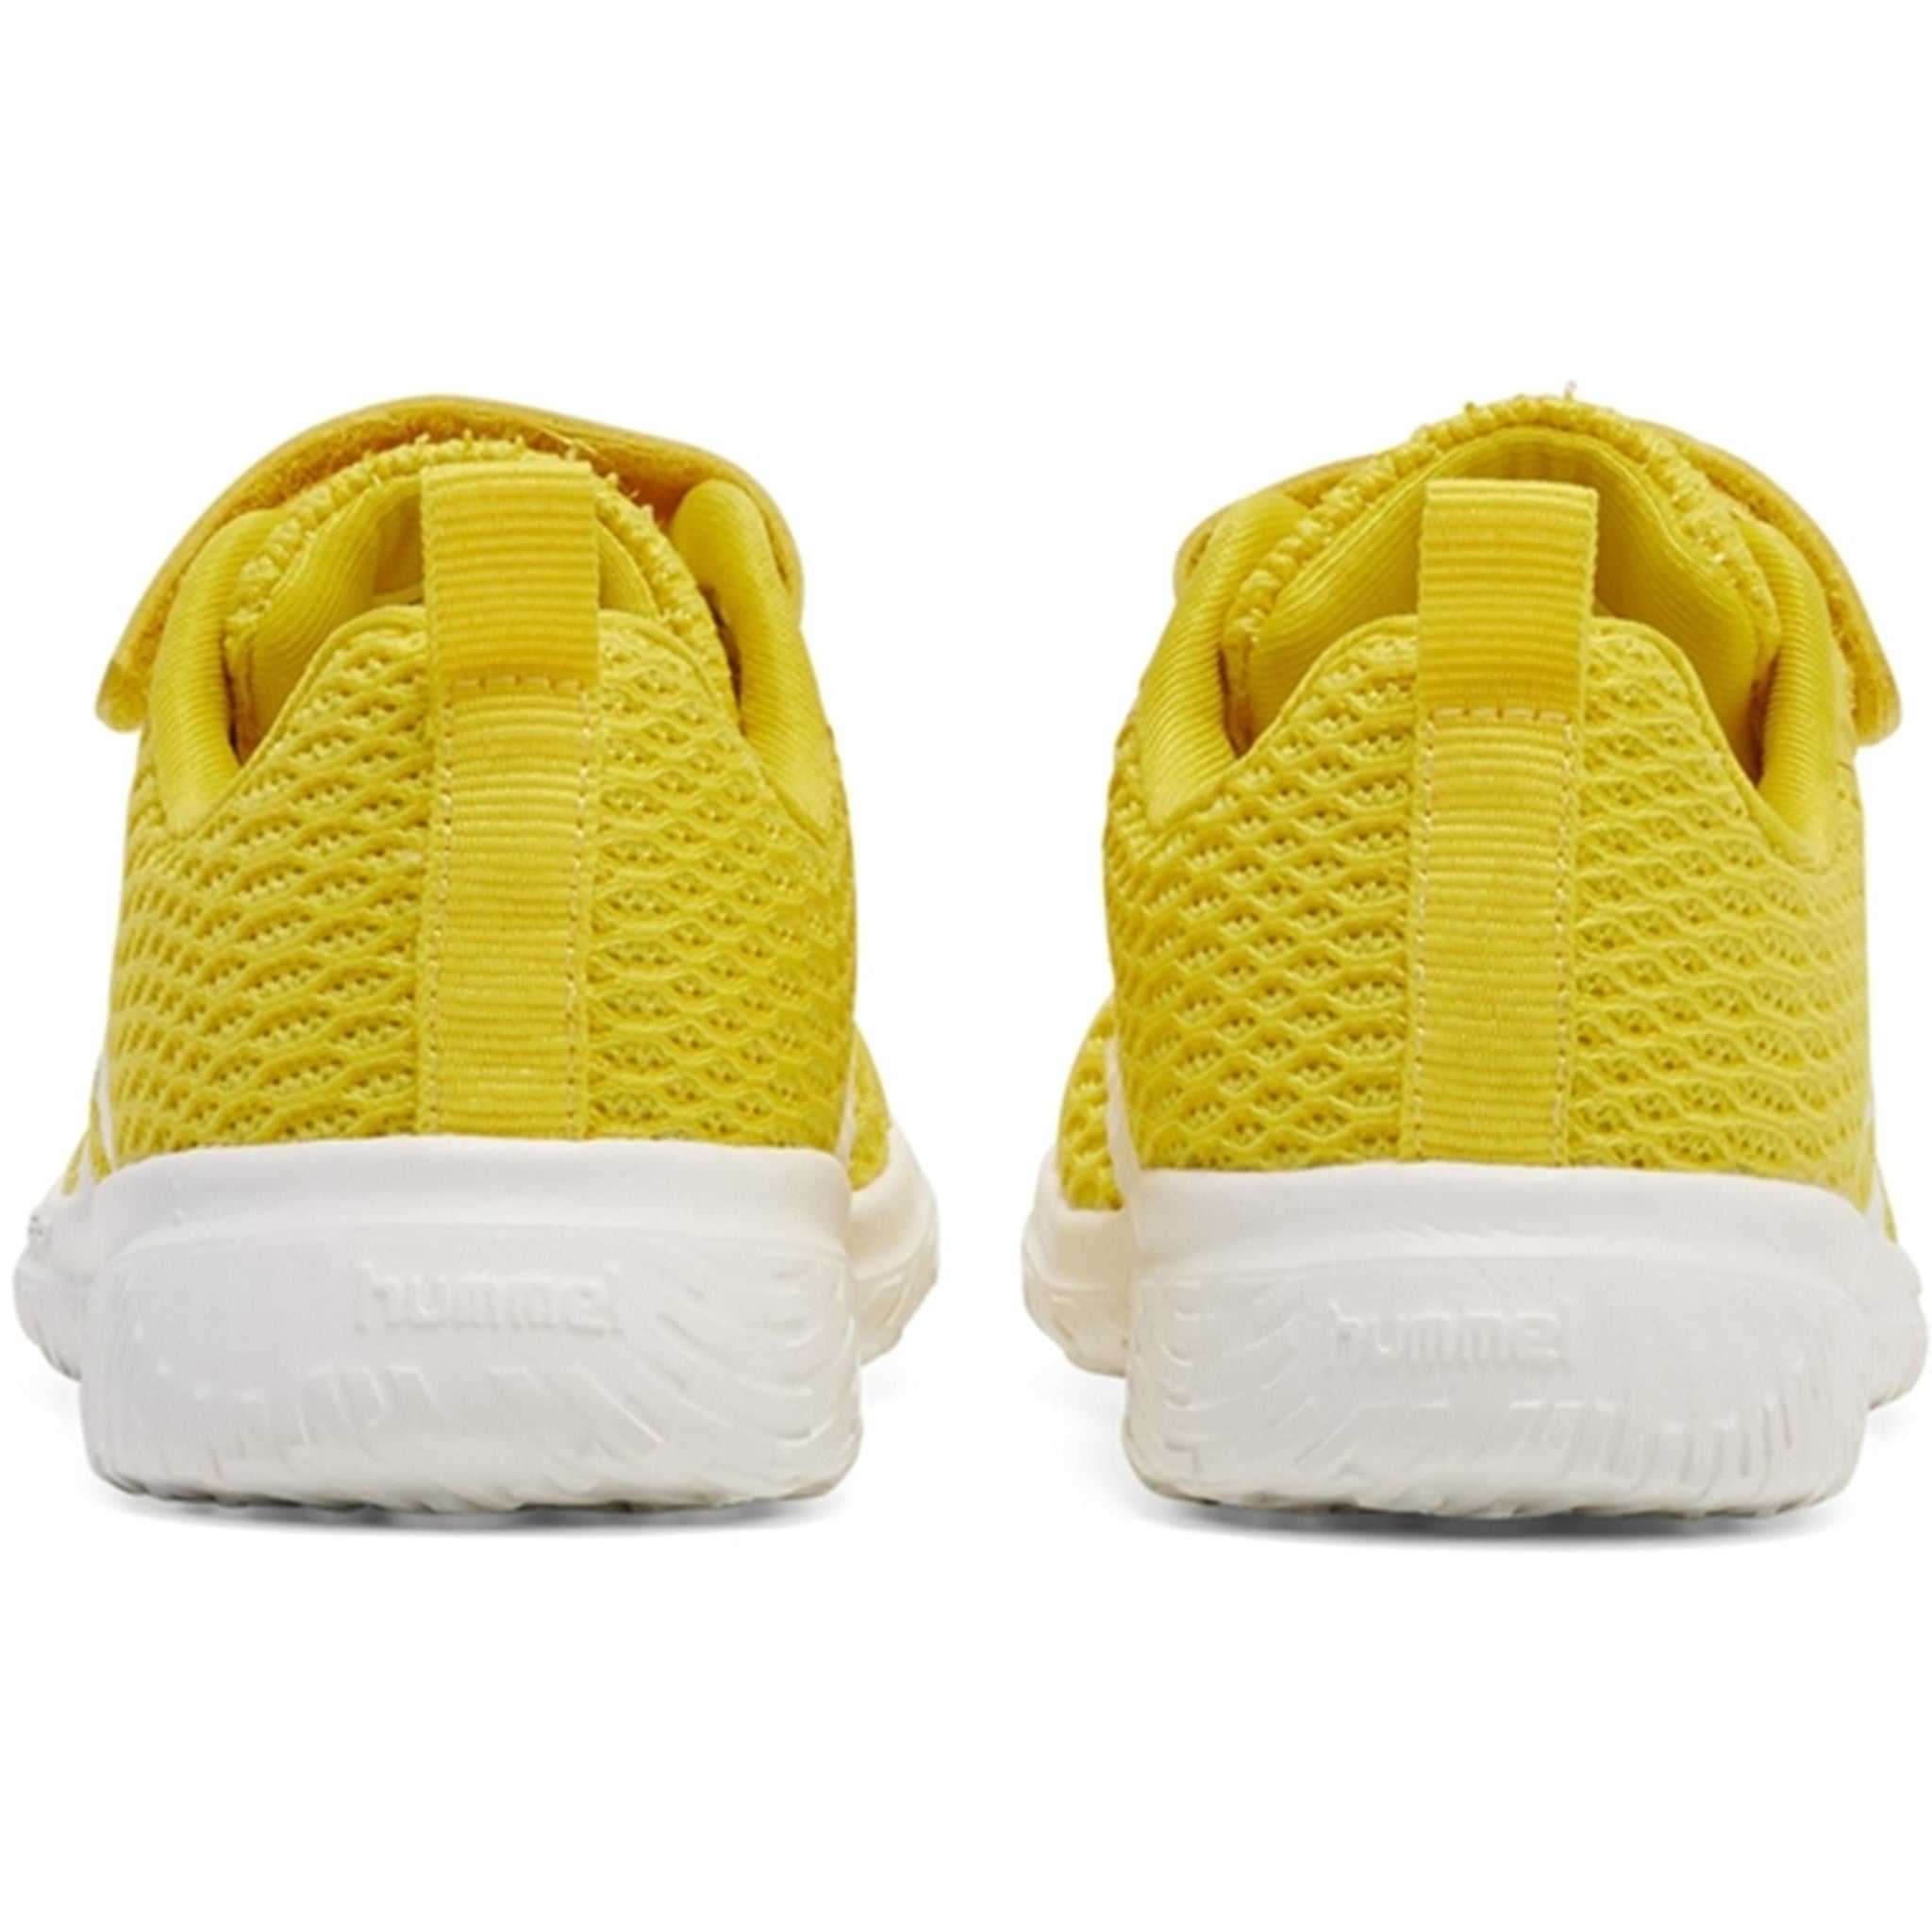 Hummel Actus Recycled Infant Sneakers Maize 5